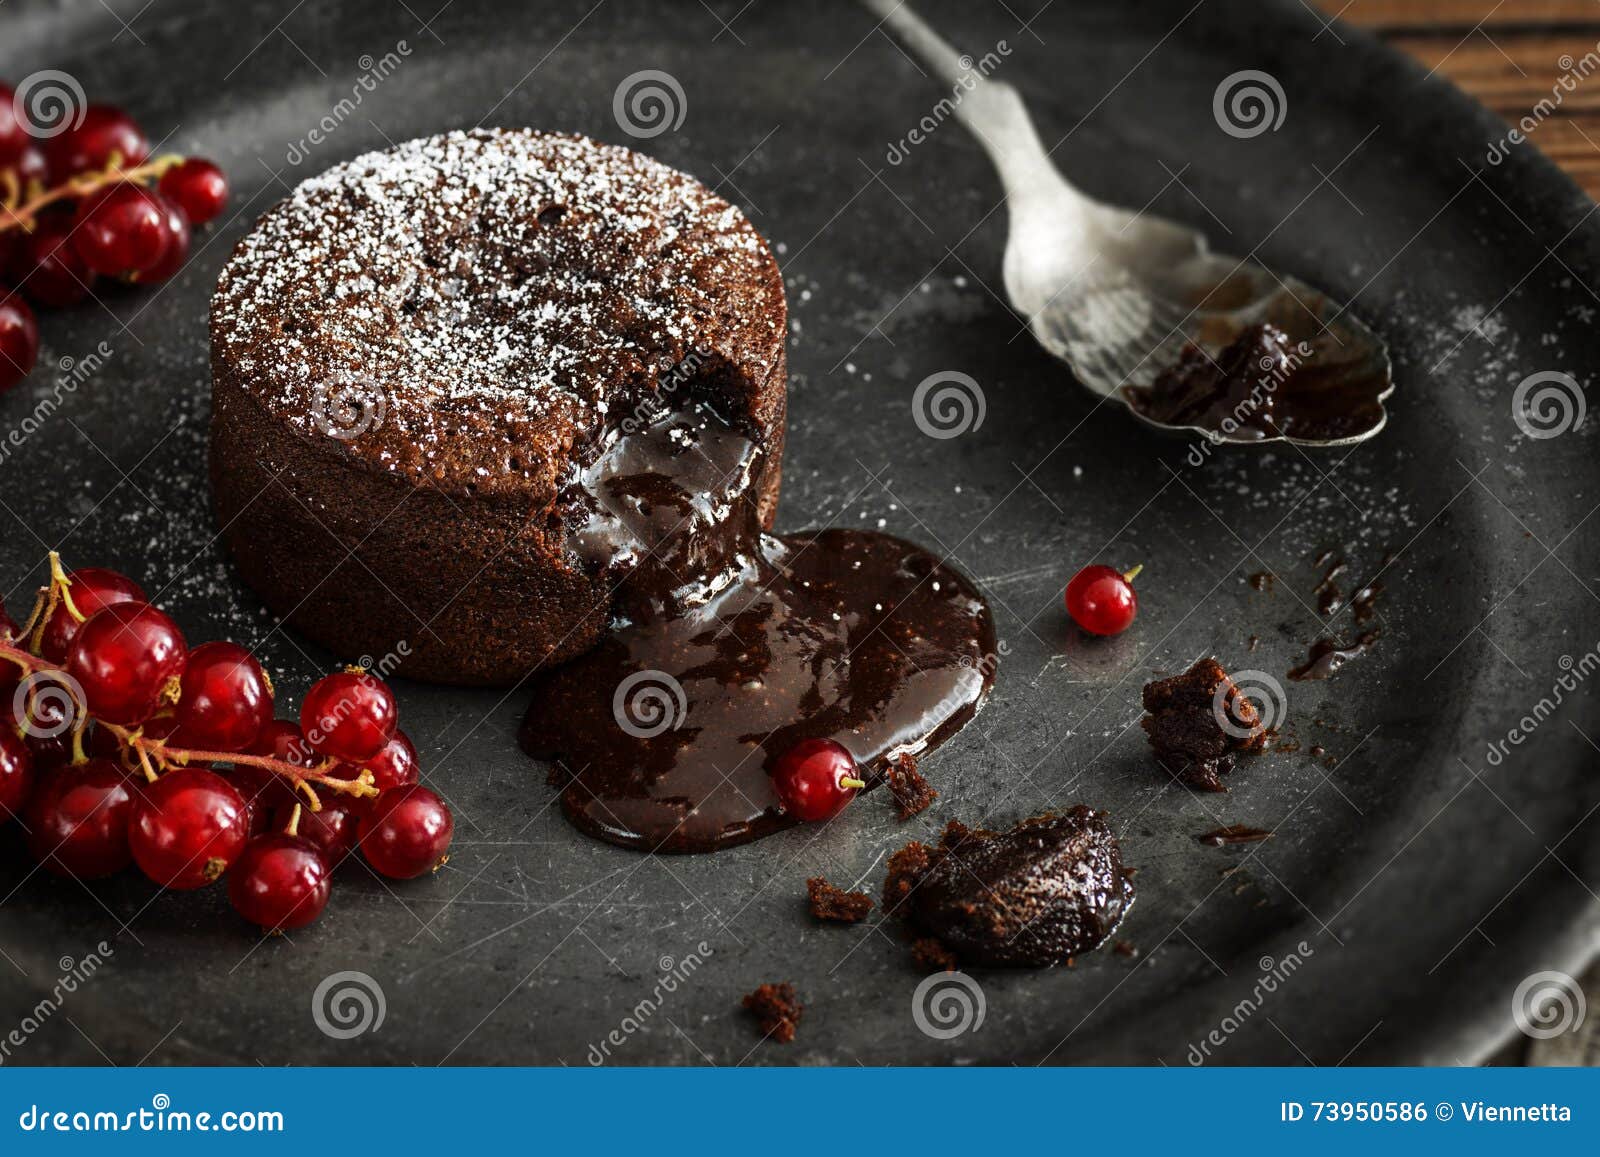 warm chocolate lava cake with red currants